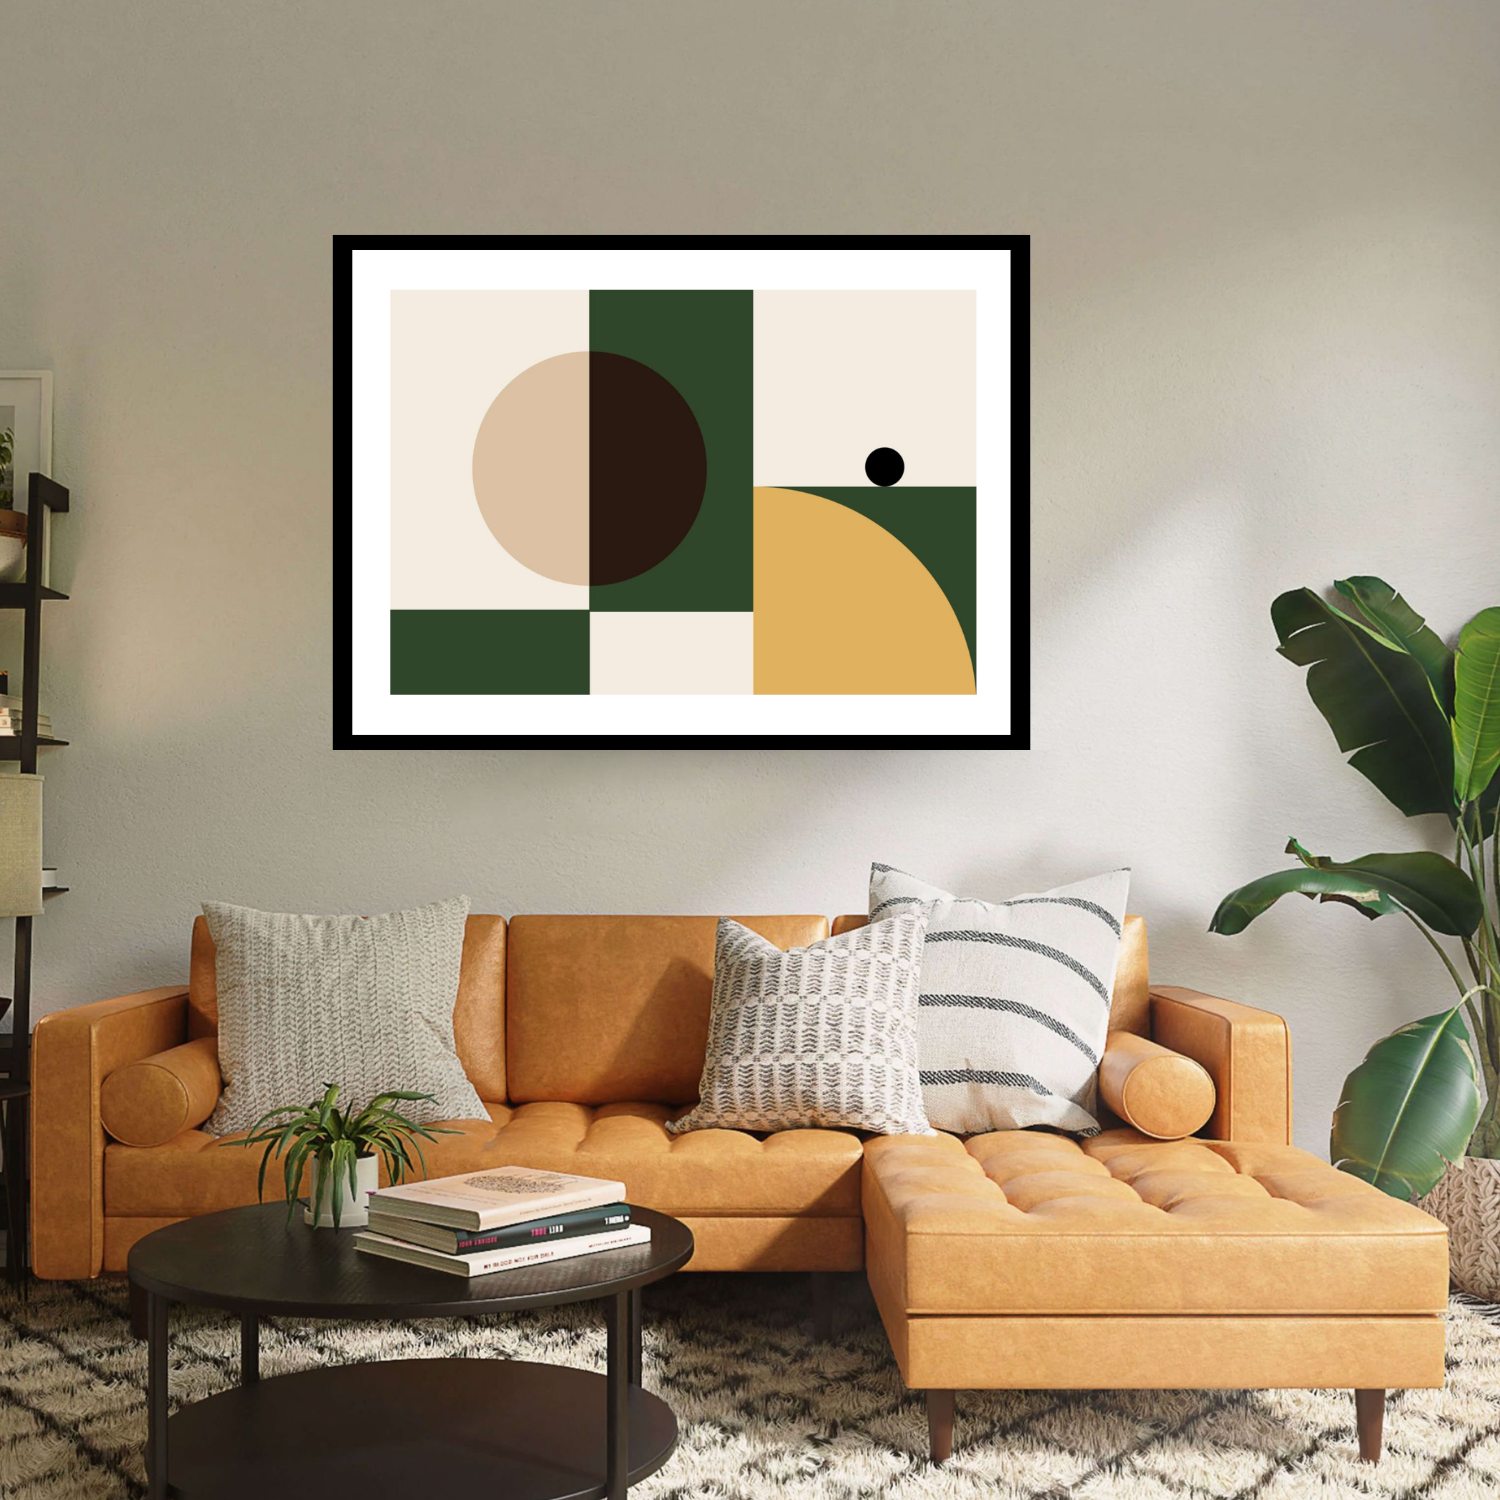 Elevate your space with "Botanist Puzzle" by George Rosaly. A stunning black framed archival digital print that blends abstraction and street art, this contemporary piece features vibrant green, black, and yellow shapes against a cream backdrop, embodying the essence of the Pop Art movement. 